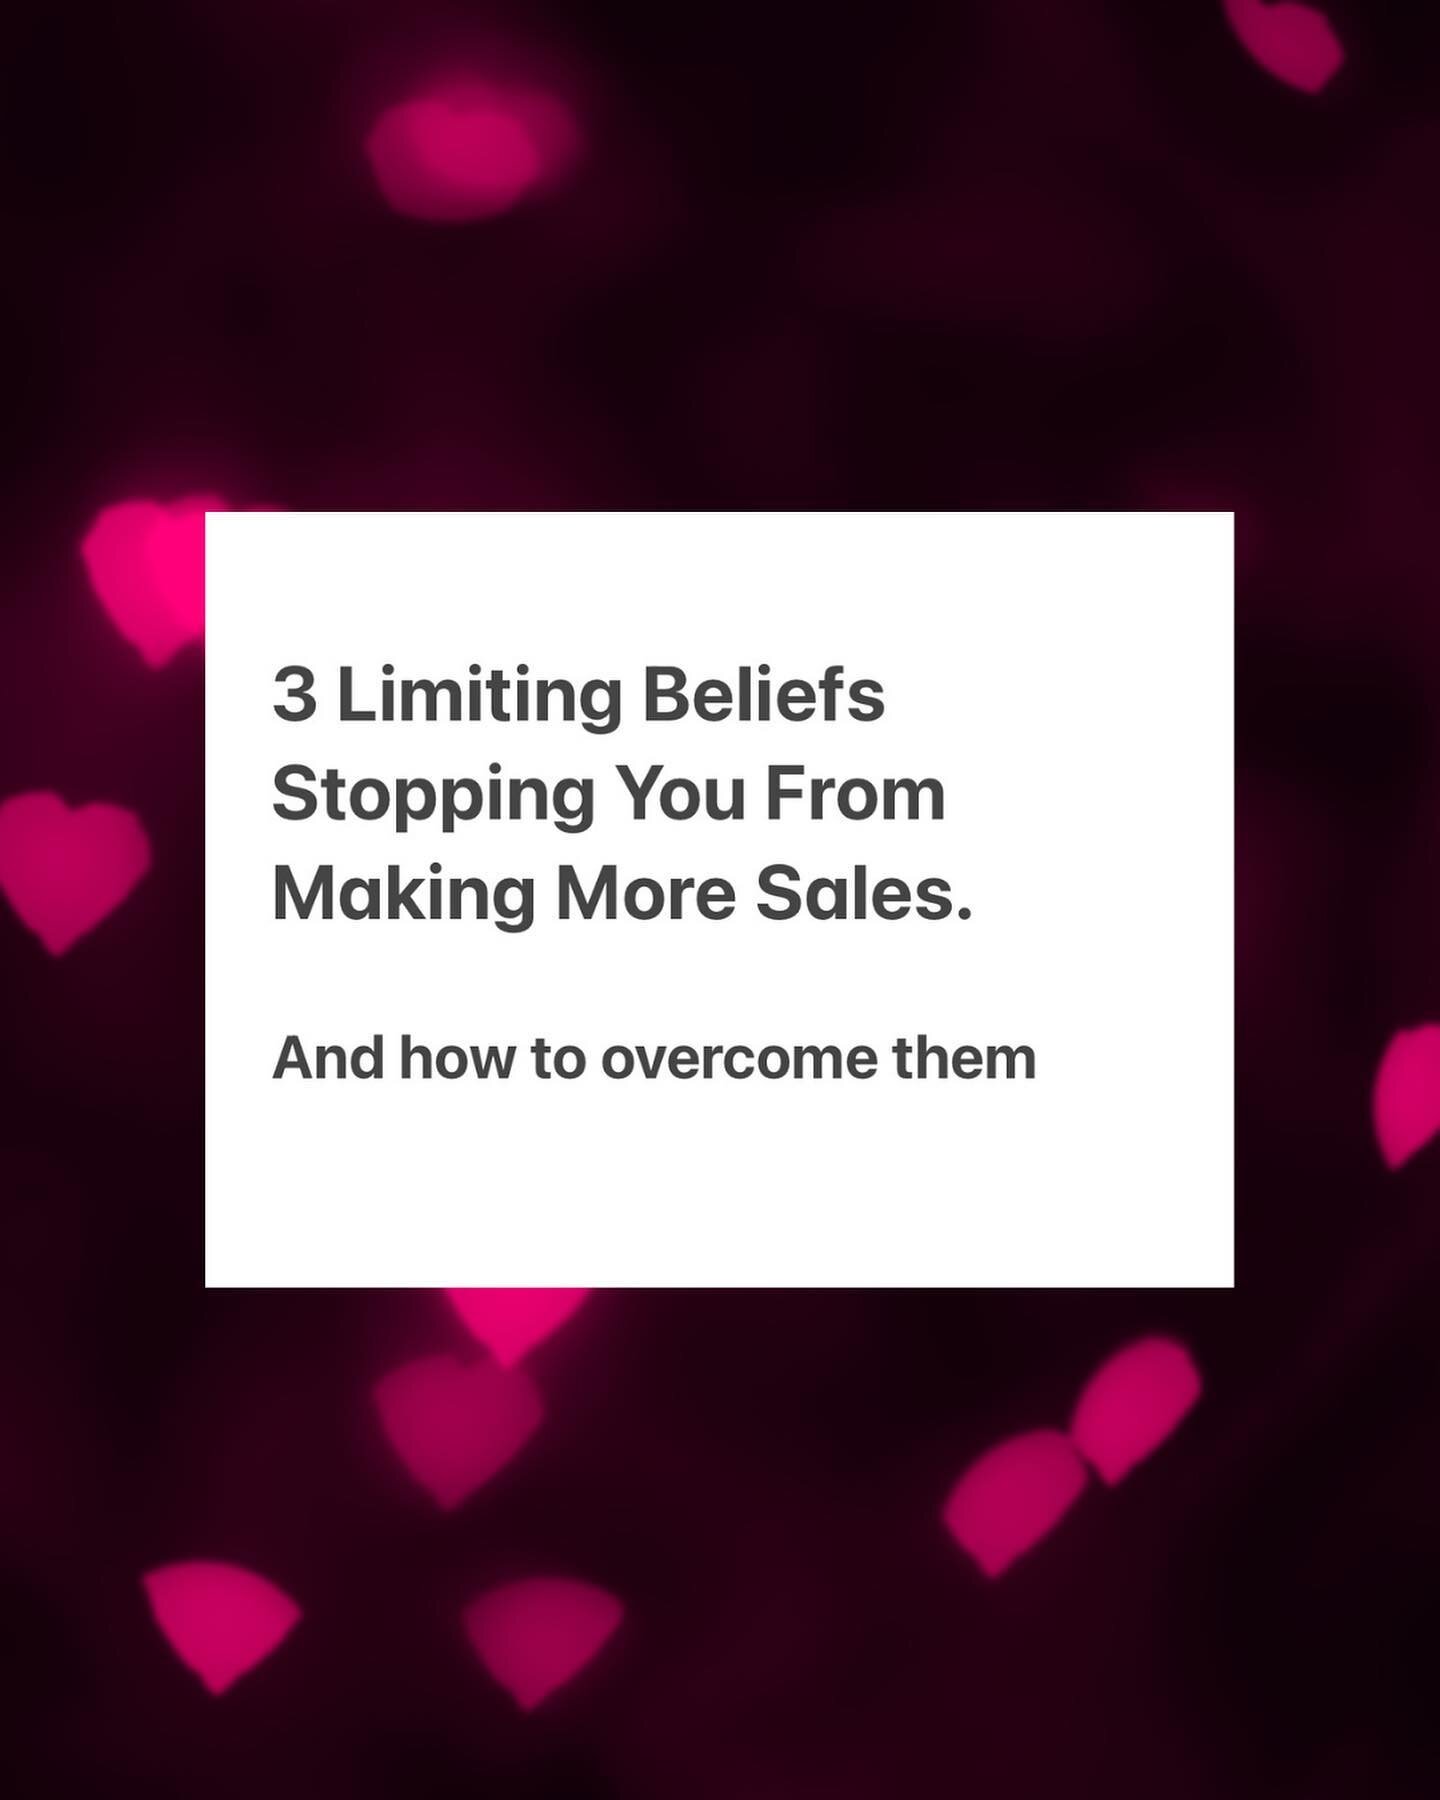 When it comes to making more sales in your business your beliefs AROUND sales can make or break whether or not it happens.

As a Coach, actually having to SELL your services can be a frightening prospect - worse if you haven&rsquo;t ever sold anythin